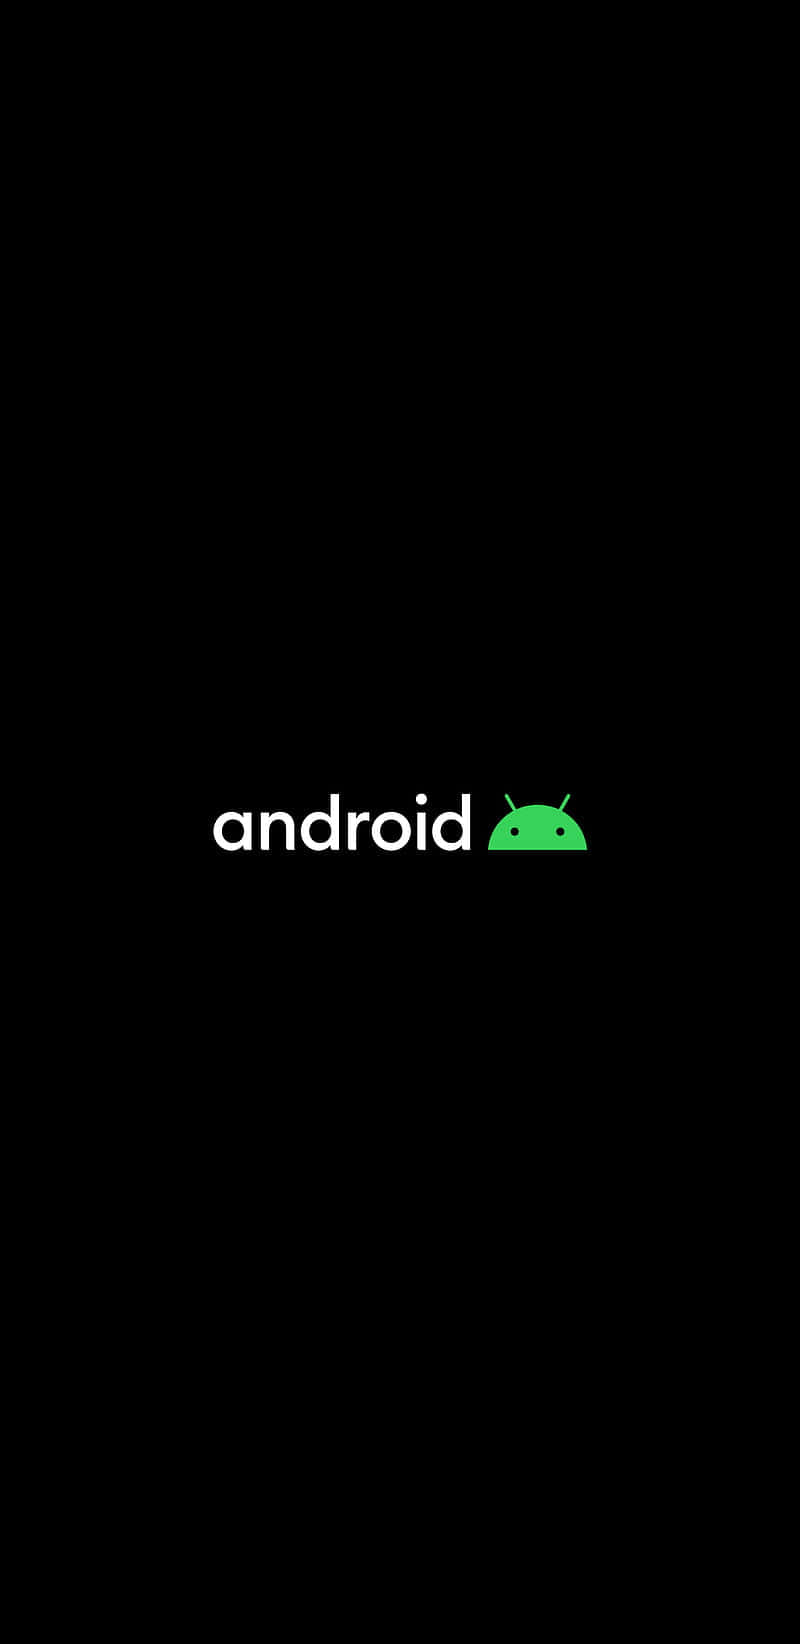 Android Logo On A Black Background Wallpaper